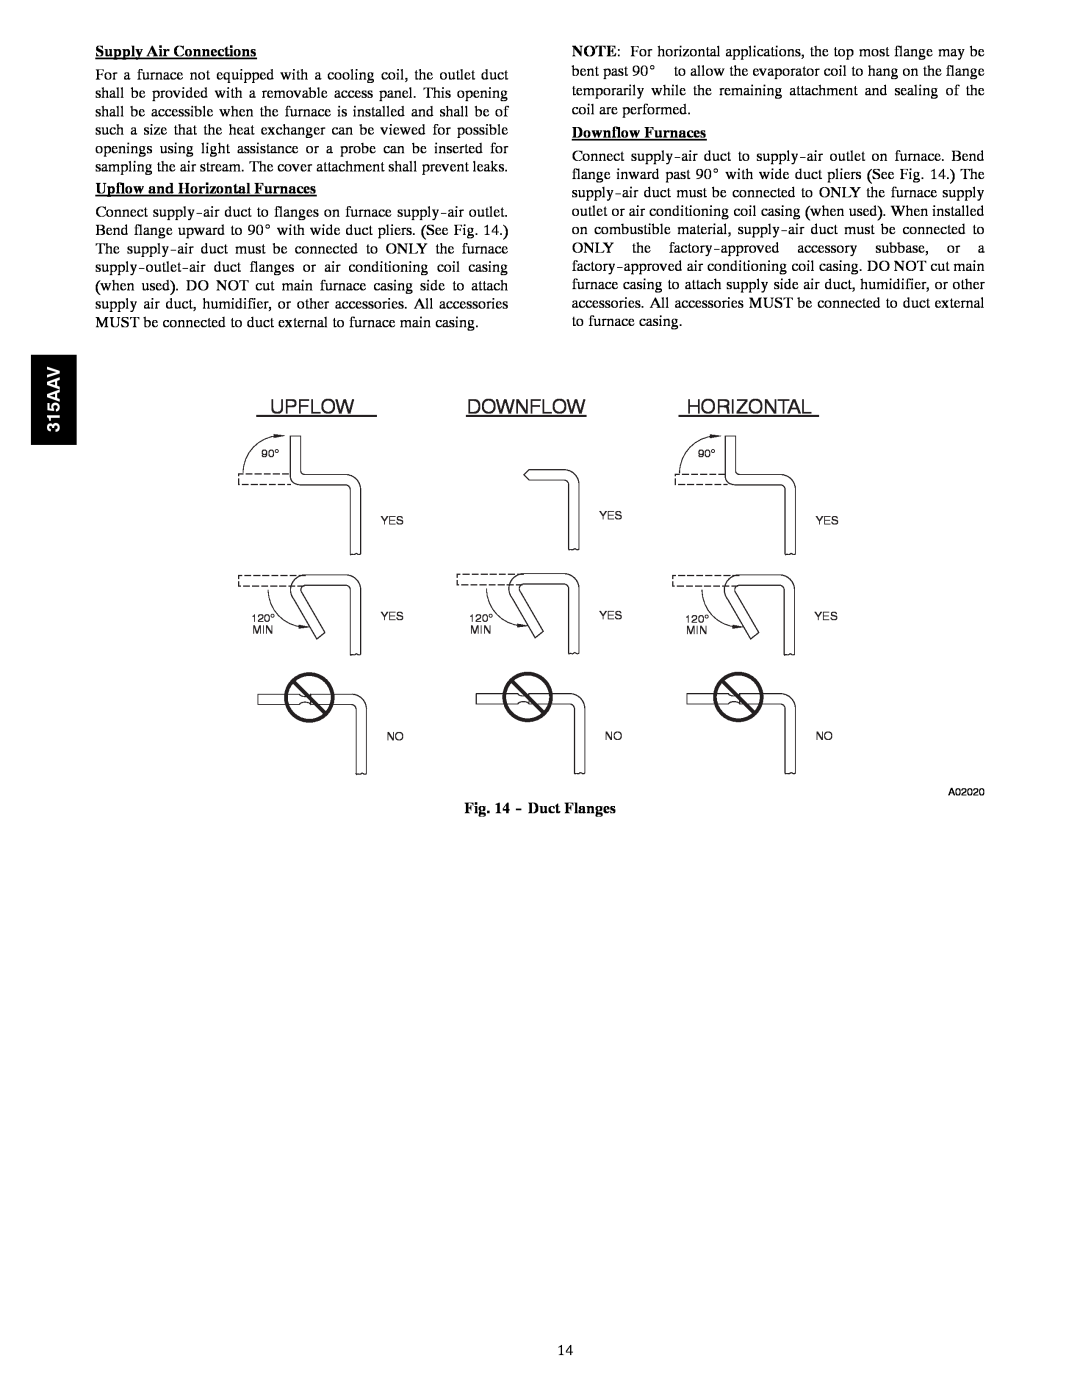 Bryant 315AAV instruction manual Supply Air Connections, Upflow and Horizontal Furnaces, Downflow Furnaces, Duct Flanges 